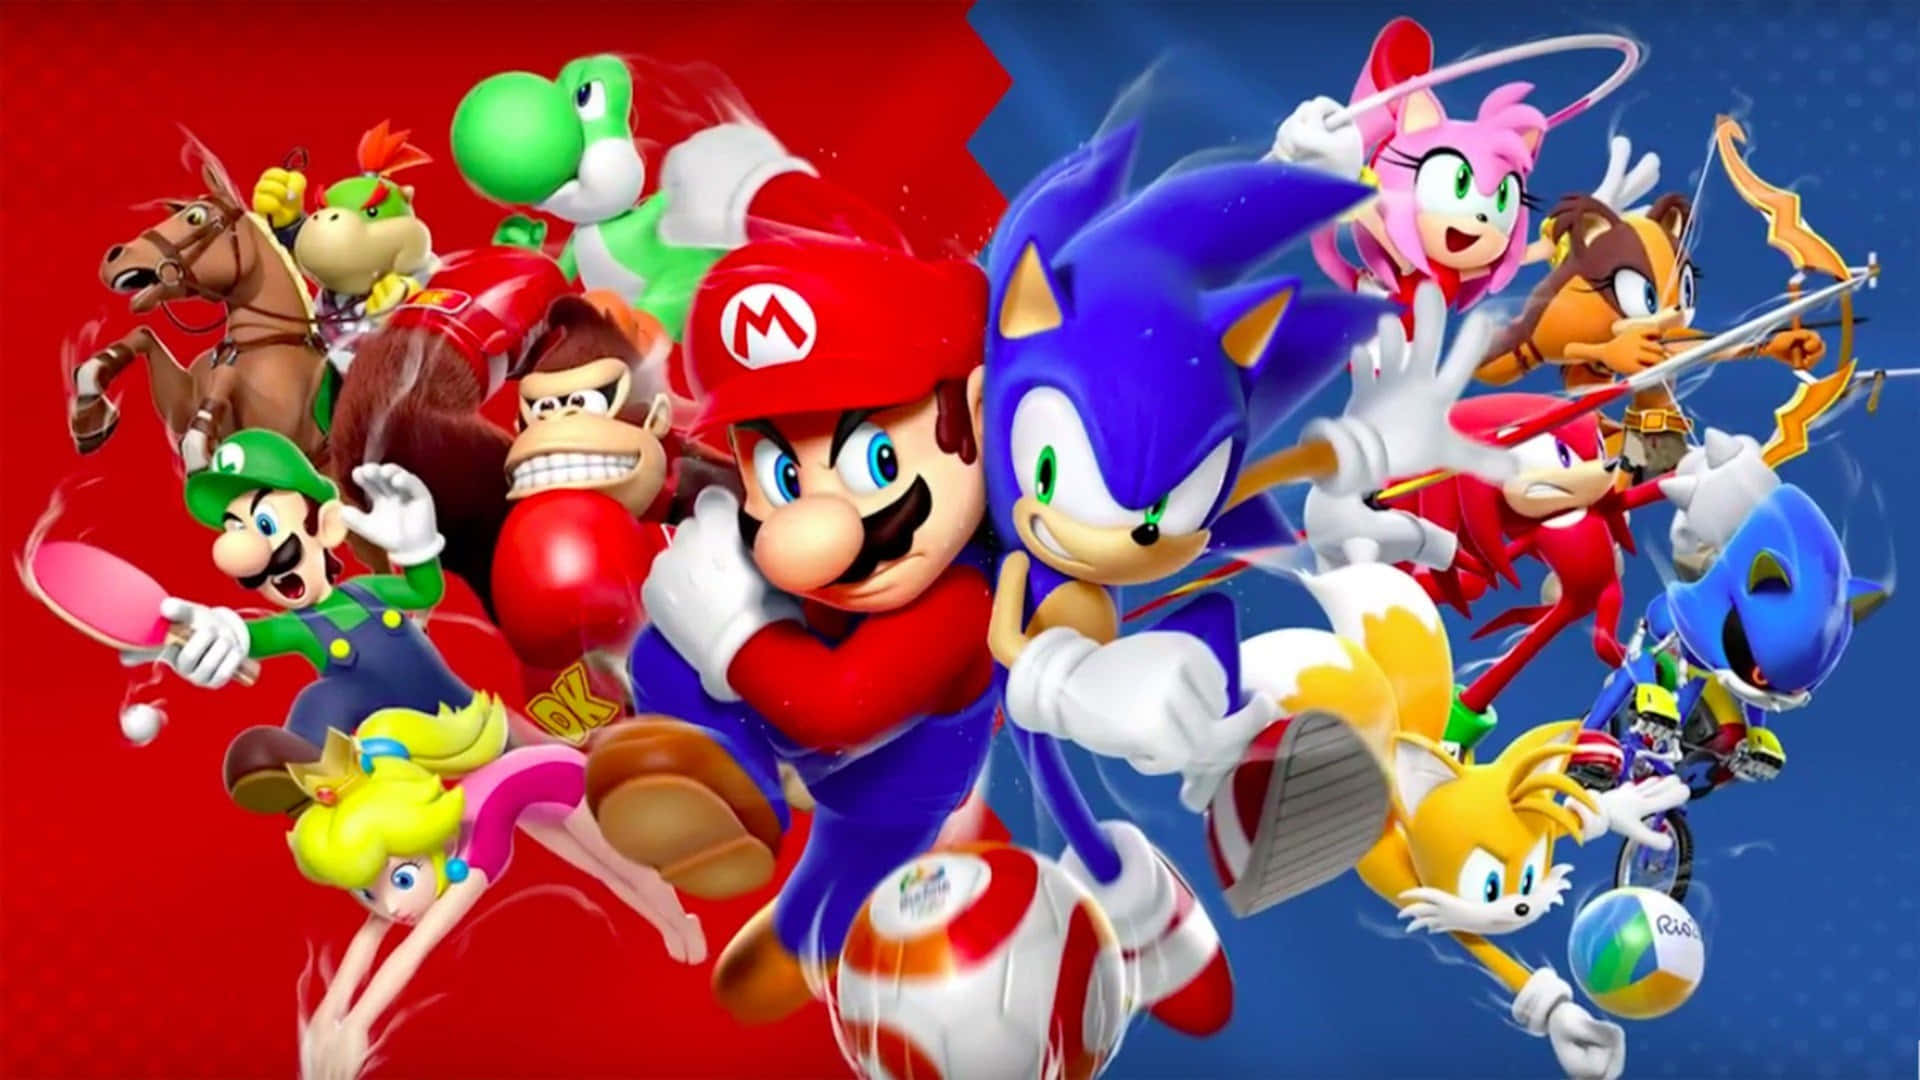 A Group Of Nintendo Characters In A Red And Blue Background Wallpaper